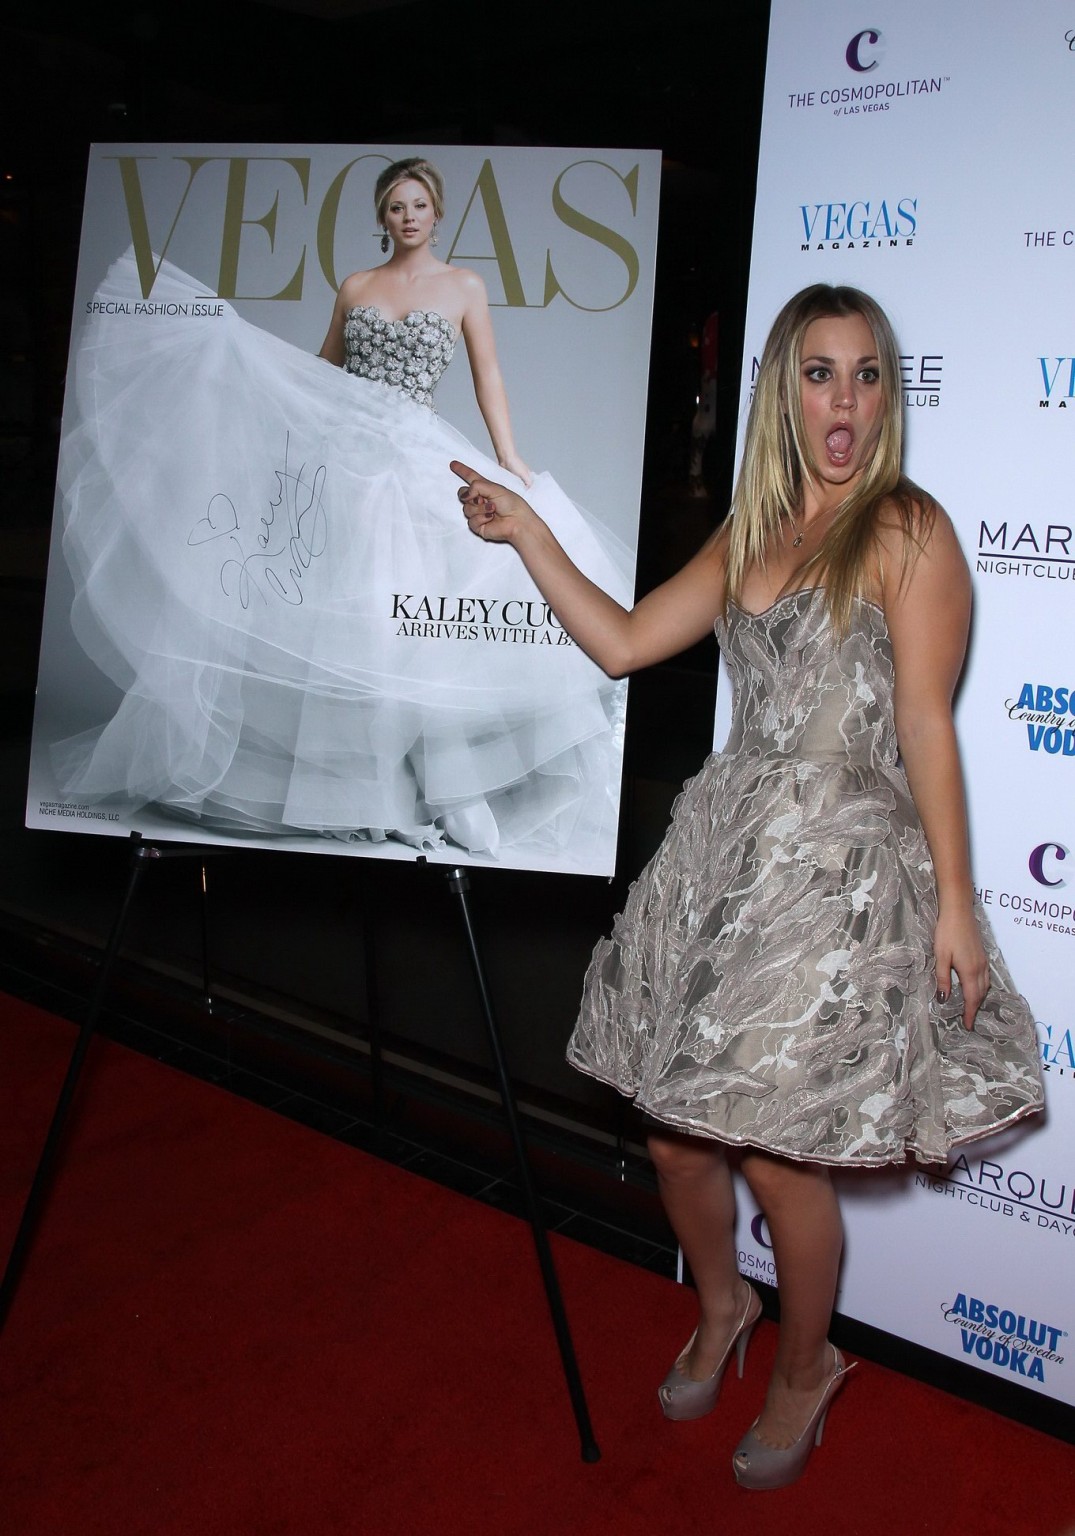 Kaley Cuoco showing huge cleavage at Vegas Magazine launch party #75287097